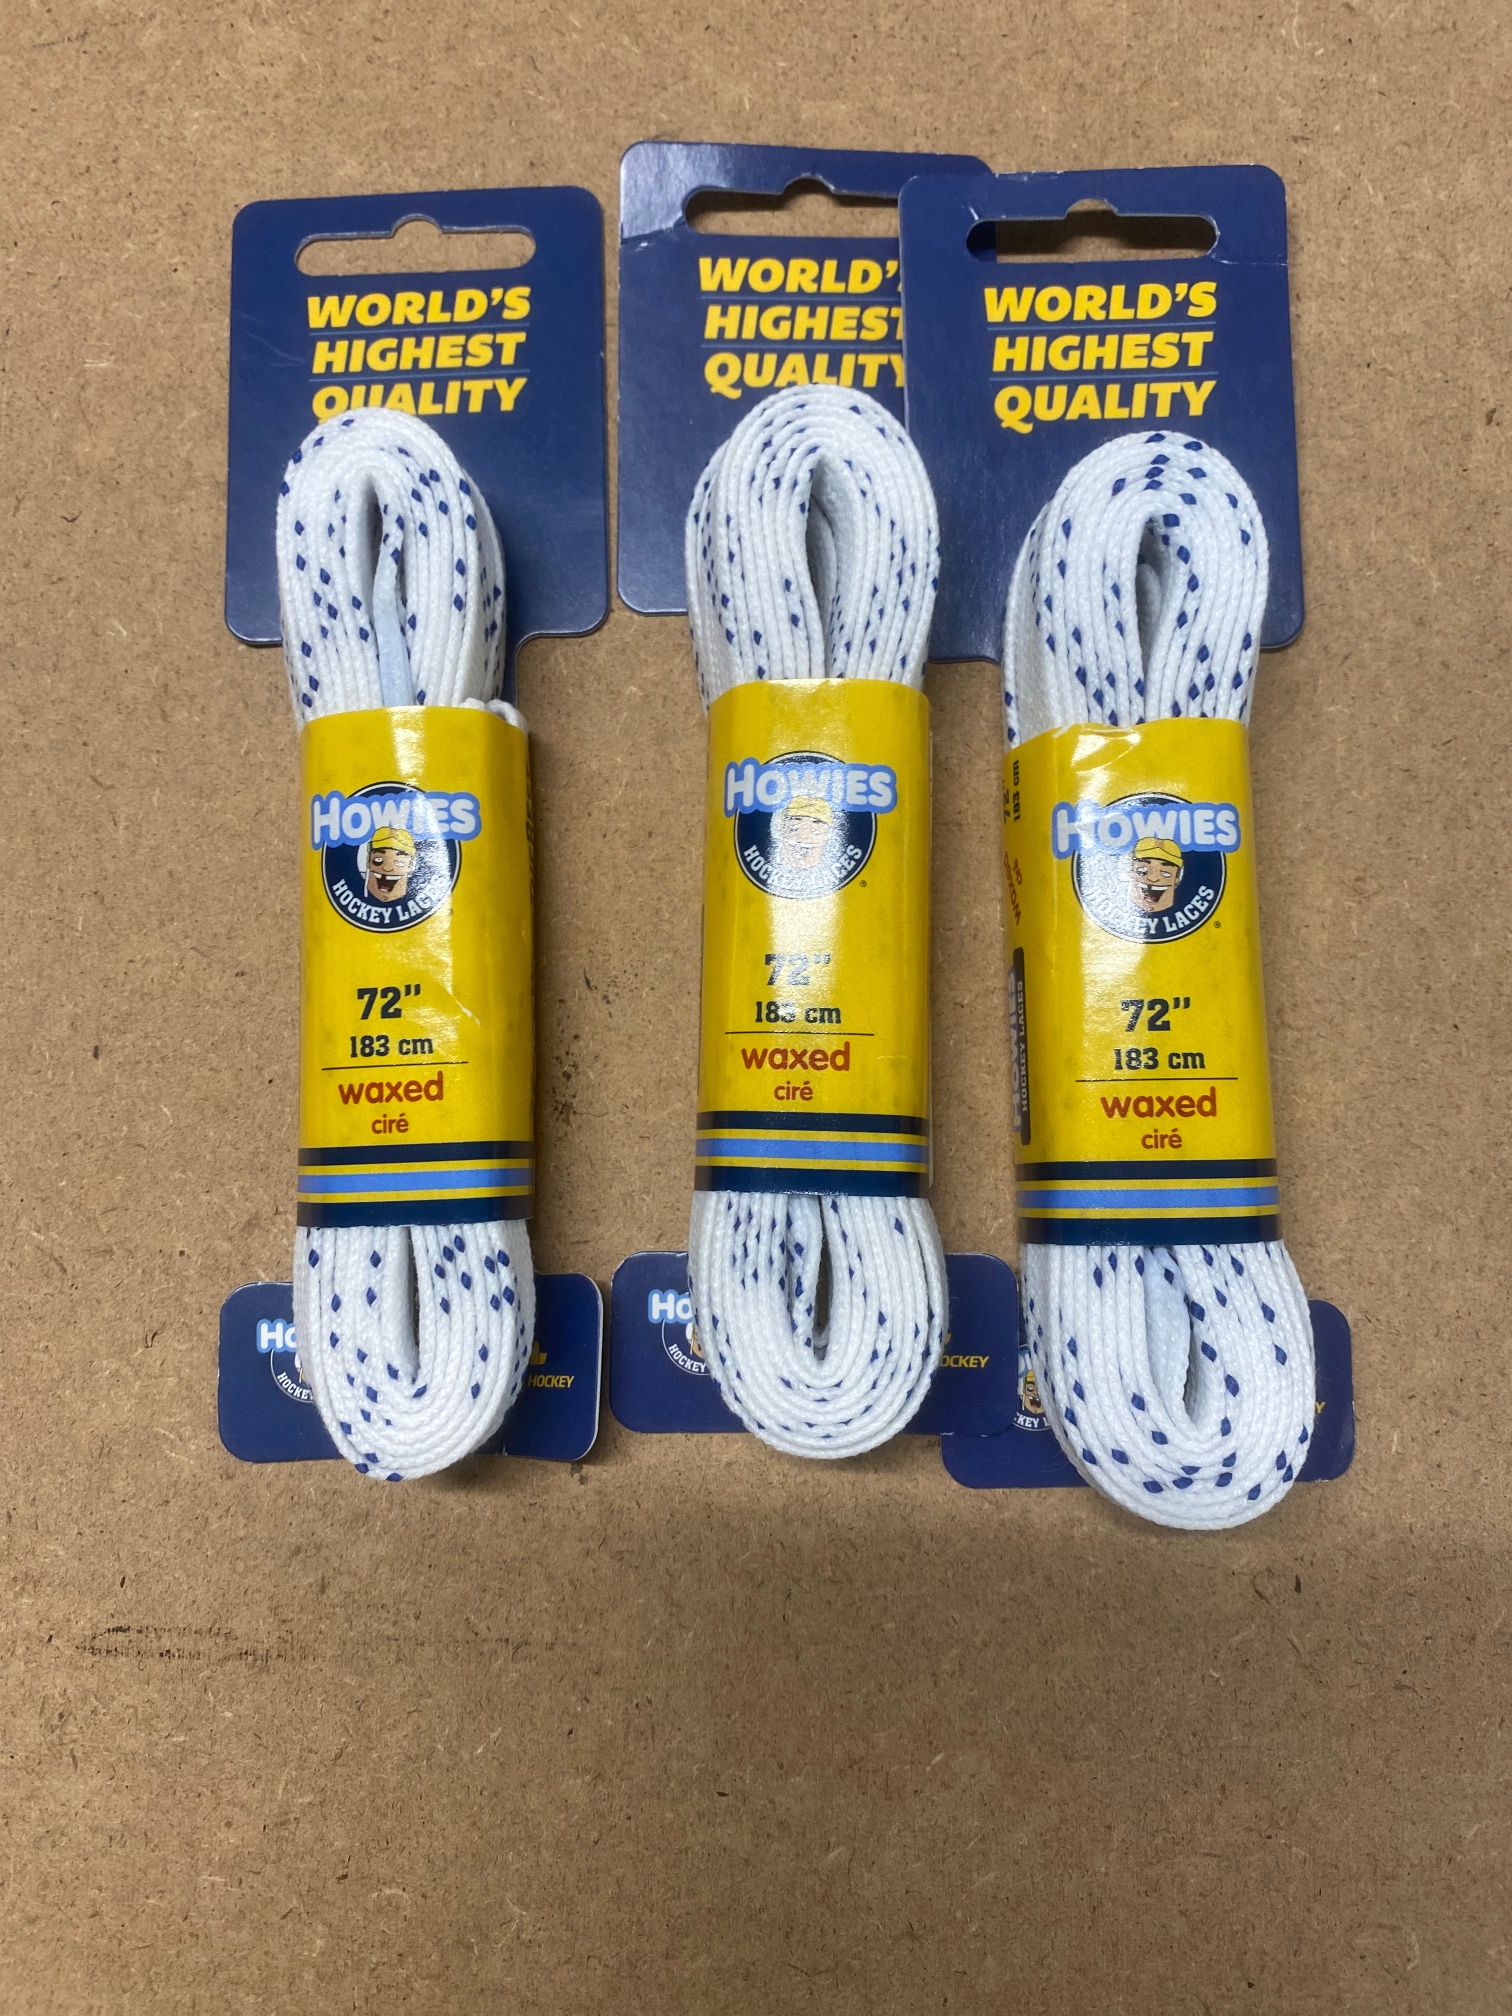 New Howies Hockey Skate Laces Waxed 72” 3 pair